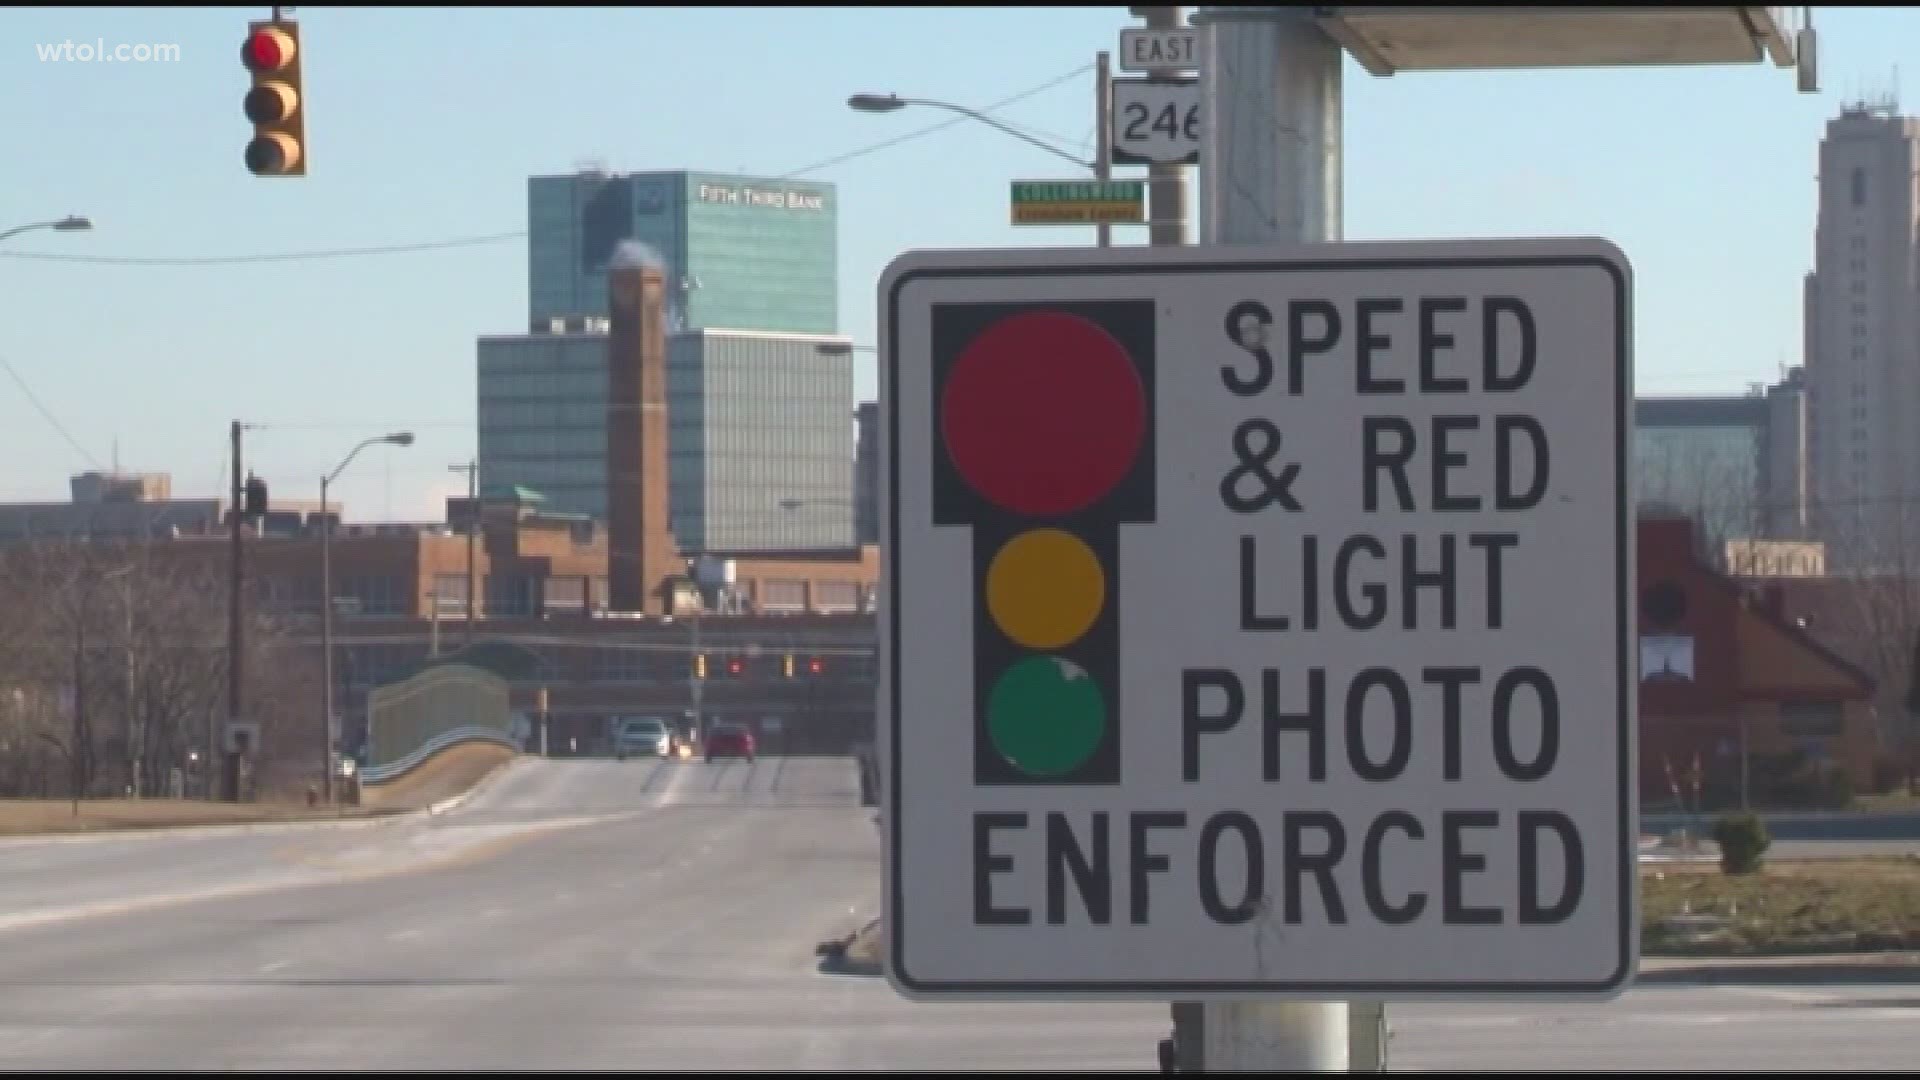 The committee is meeting to discuss whether or not to allow the red light and speeding cameras to come back next year, along with a new appeals process.